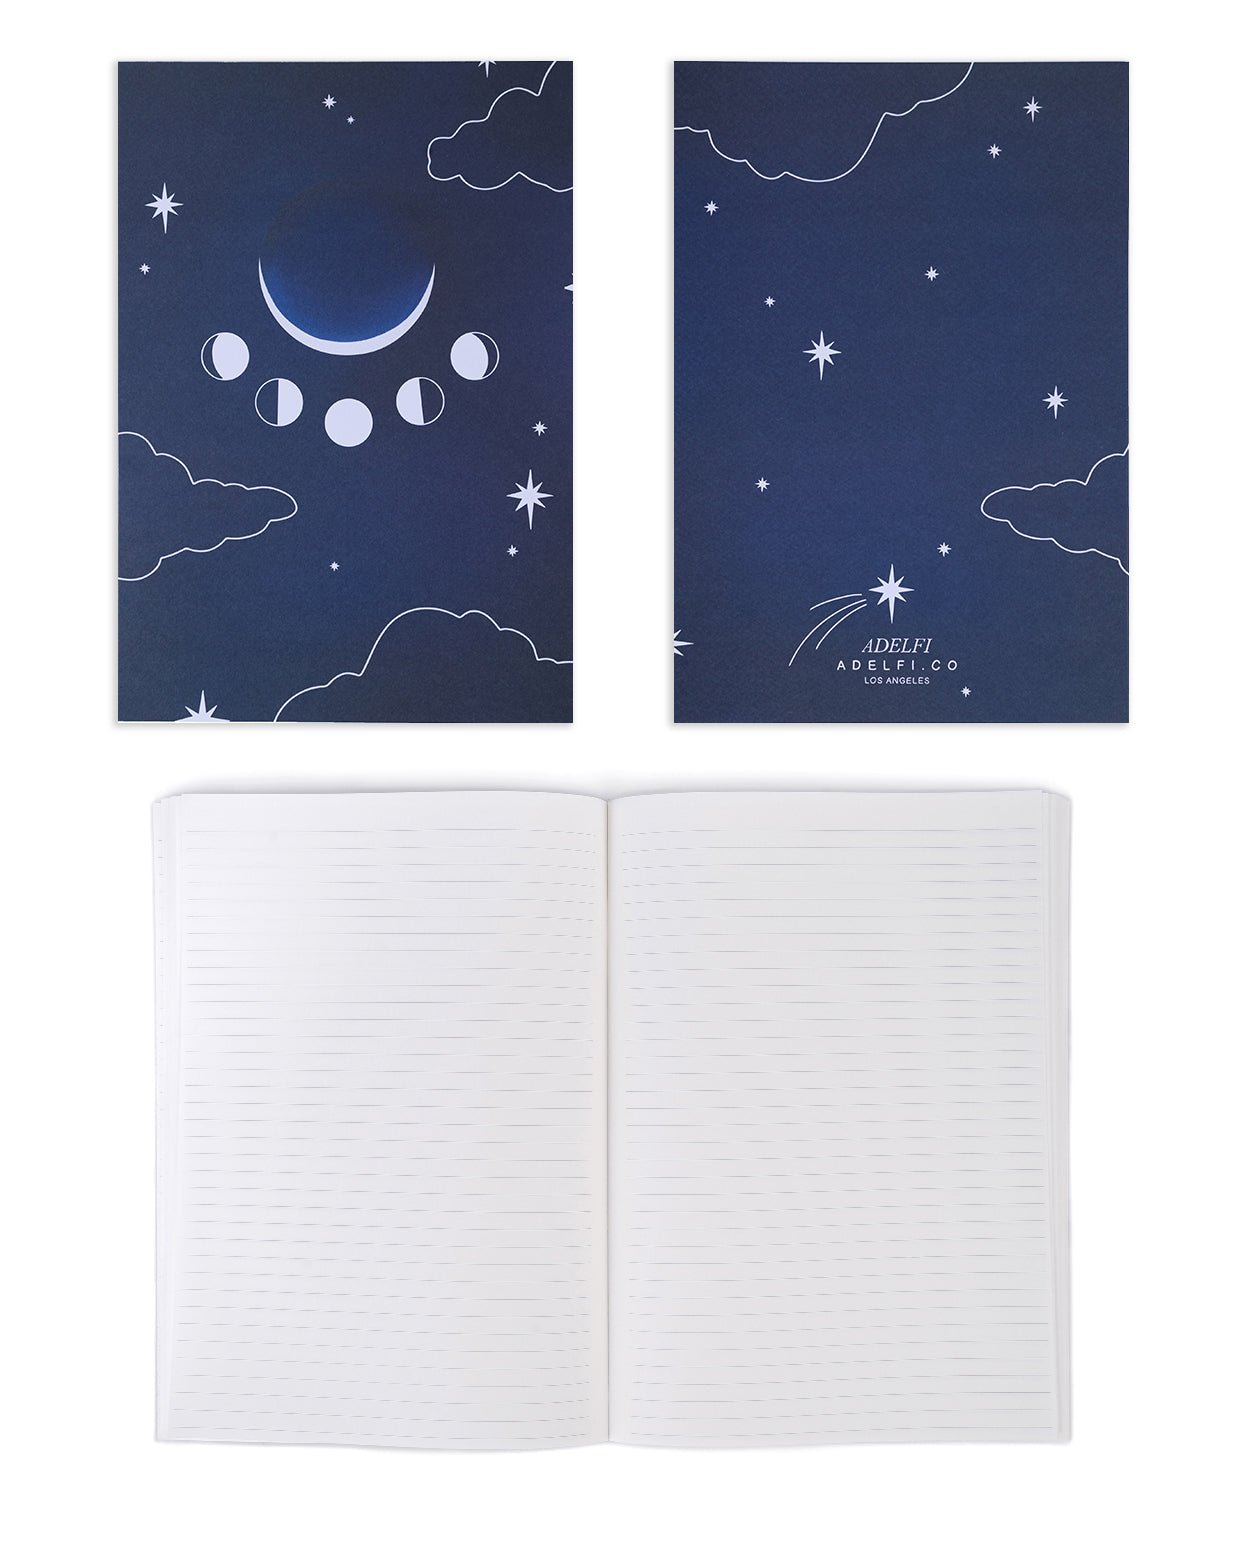 Journal with clouds and moon phases on a dark blue background. Reverse view of dark blue night sky journal with Adelfi logo and a shooting star above it. Inside view of notebook with white lined paper.